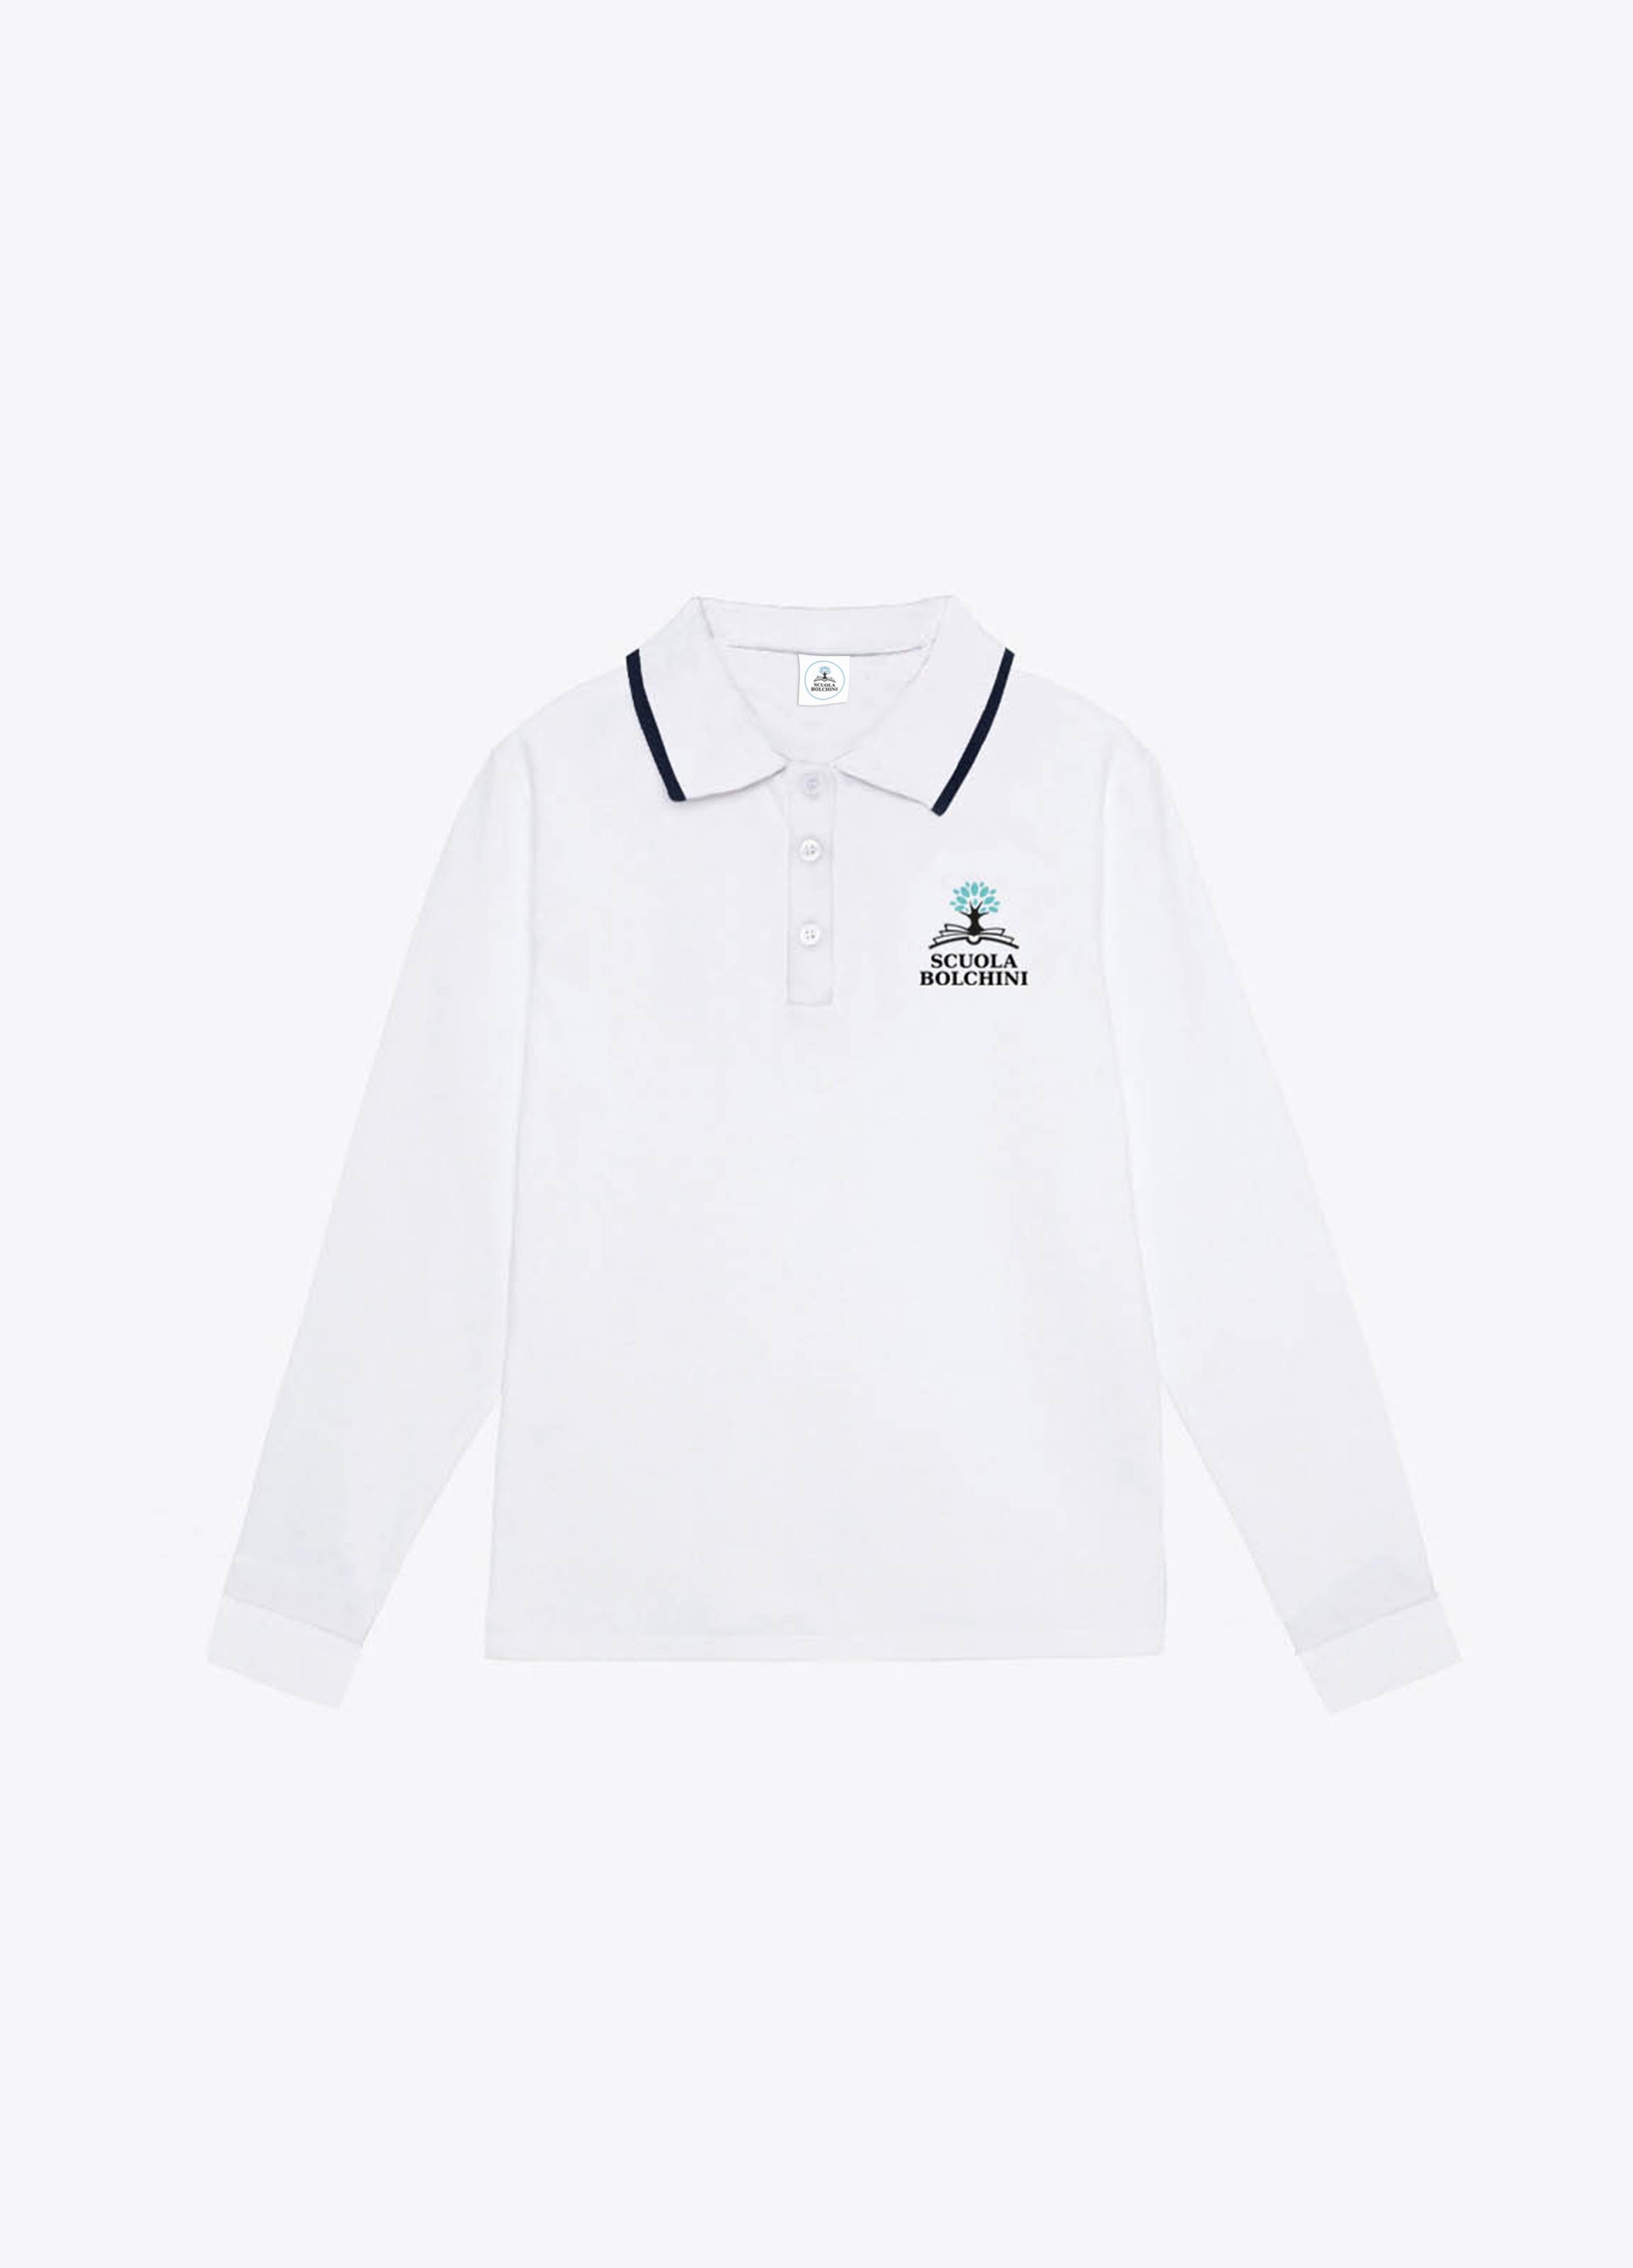 UNISEX - Long sleeves polo shirt with logo.